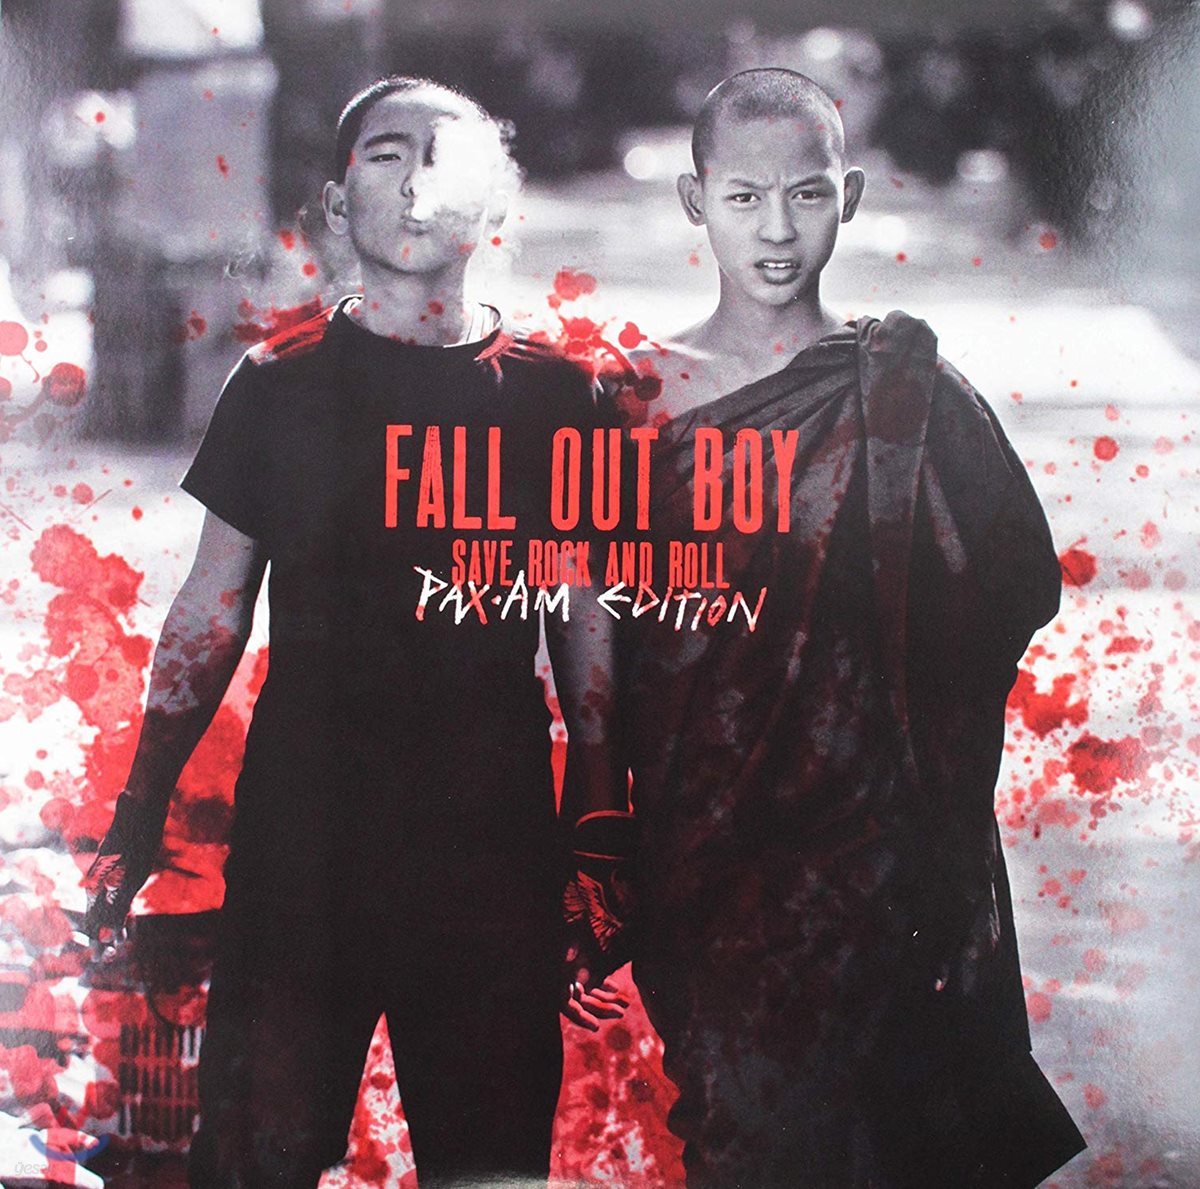 Fall Out Boy (폴 아웃 보이) - Save Rock And Roll 정규 5집 [2LP]